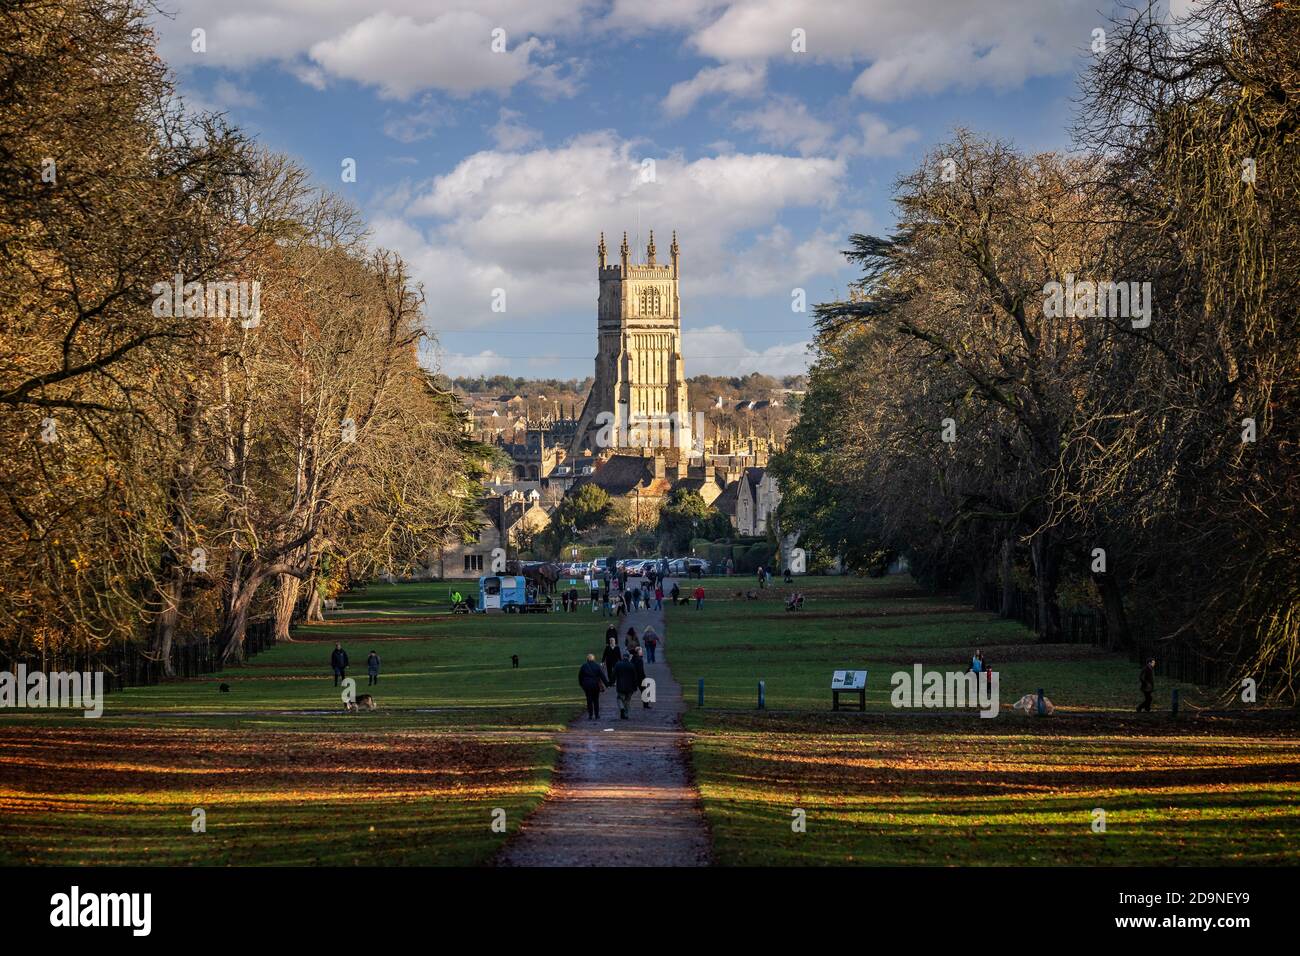 View looking towards St John Baptist Church from the Avenue in Cirencester Park in Cirencester, Gloucestershire, UK on 4 November 2020 Stock Photo